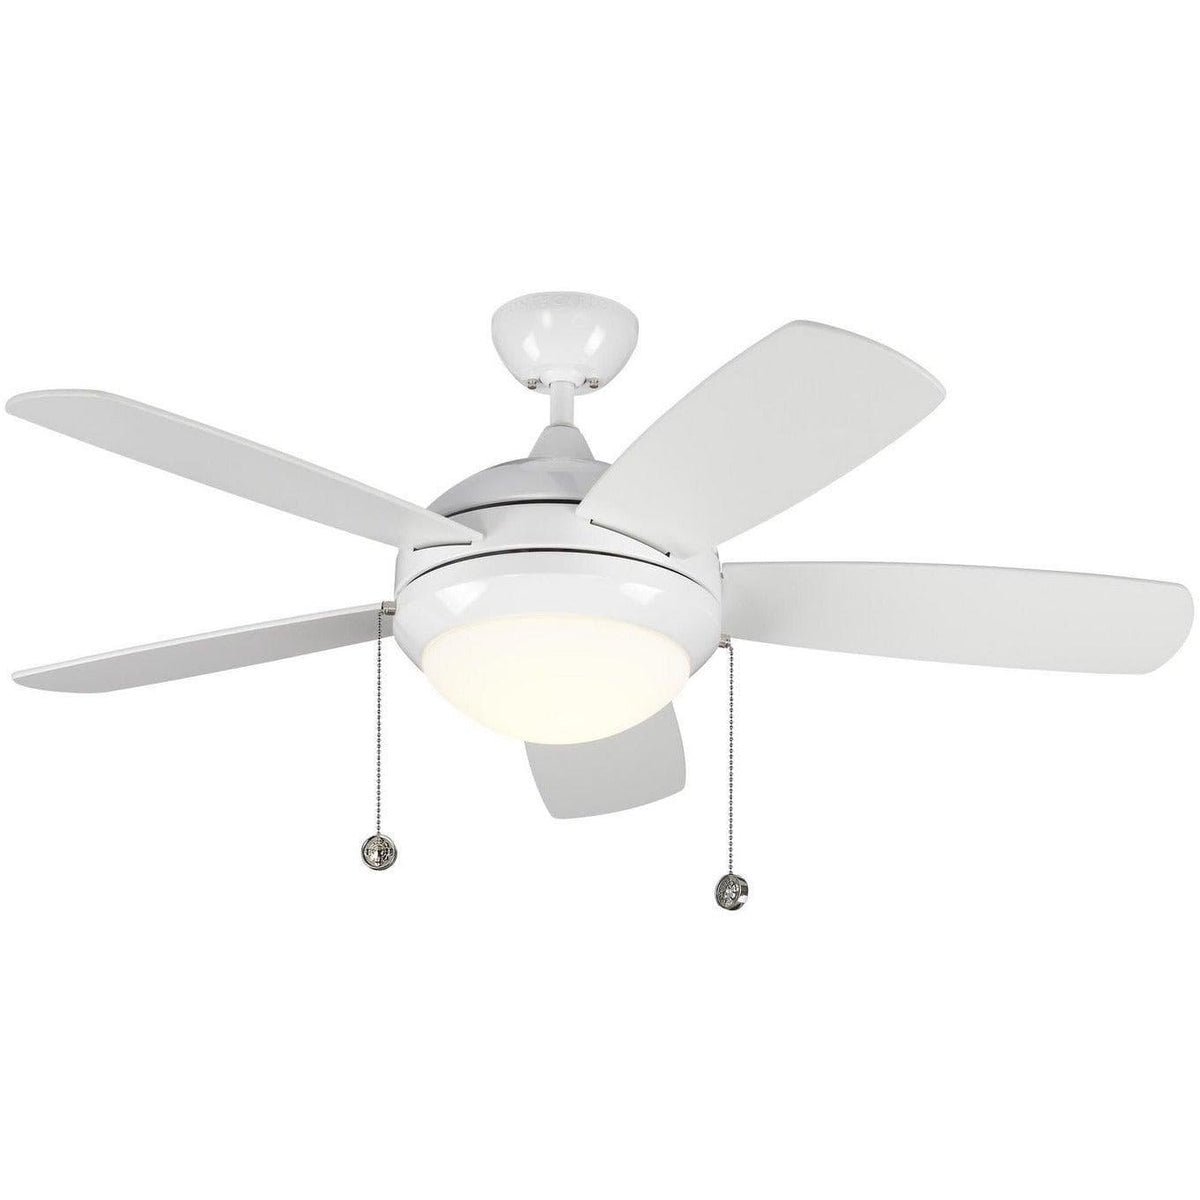 Visual Comfort Fan Collection - Discus Classic II 44" Ceiling Fan - 5DIC44WHD-V1 | Montreal Lighting & Hardware